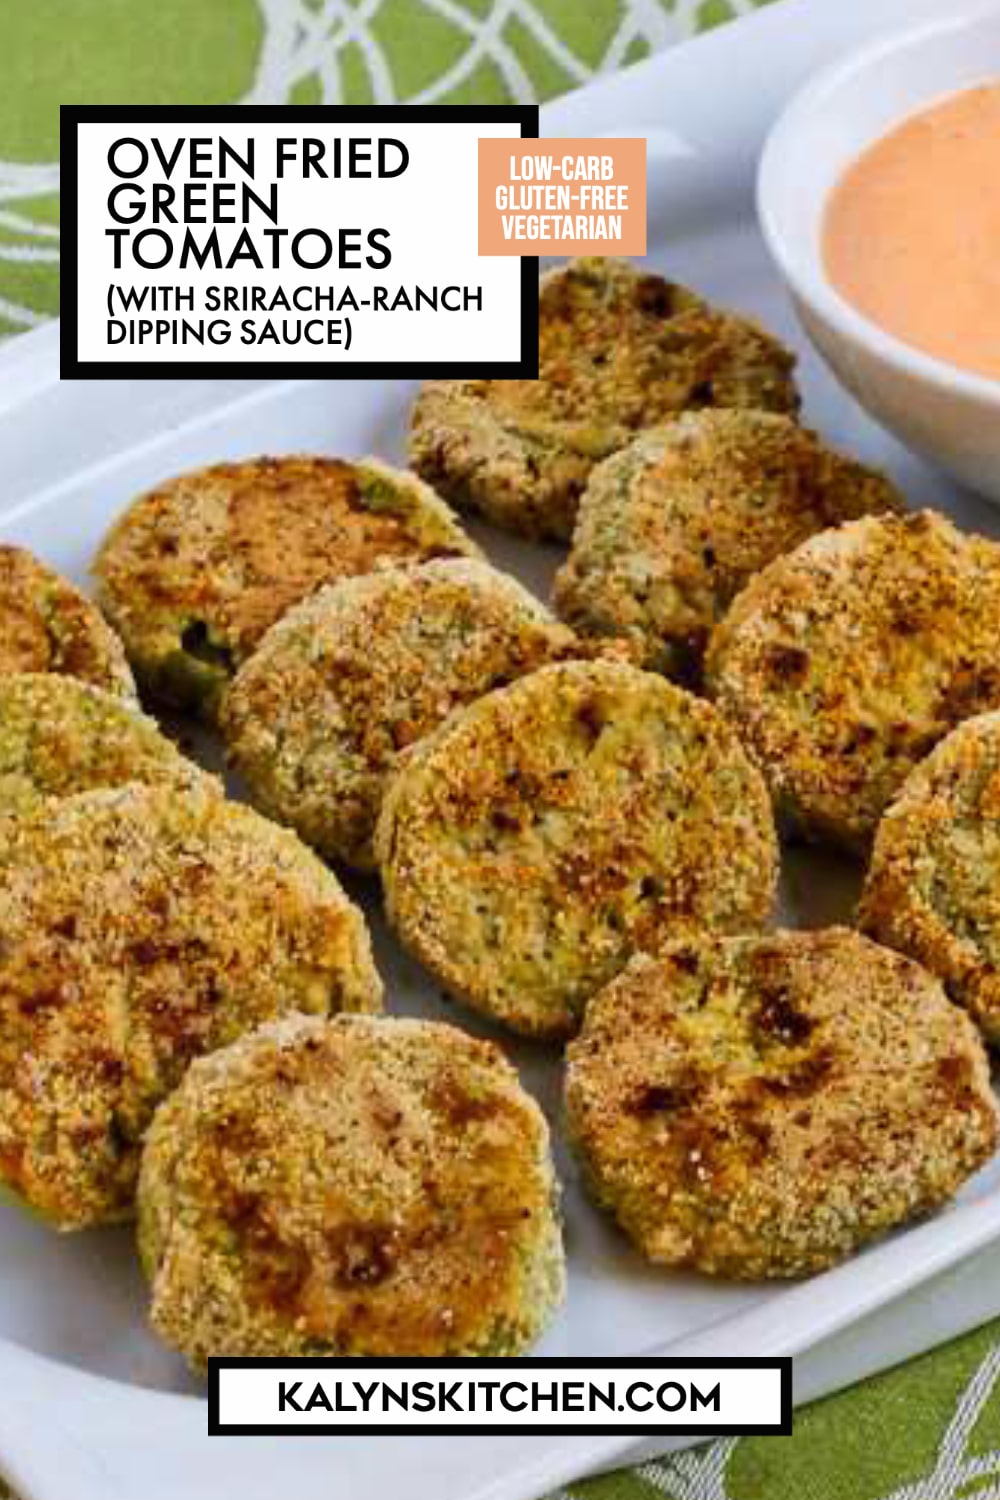 Pinterest image of Oven Fried Green Tomatoes (with Sriracha-Ranch Dipping Sauce)